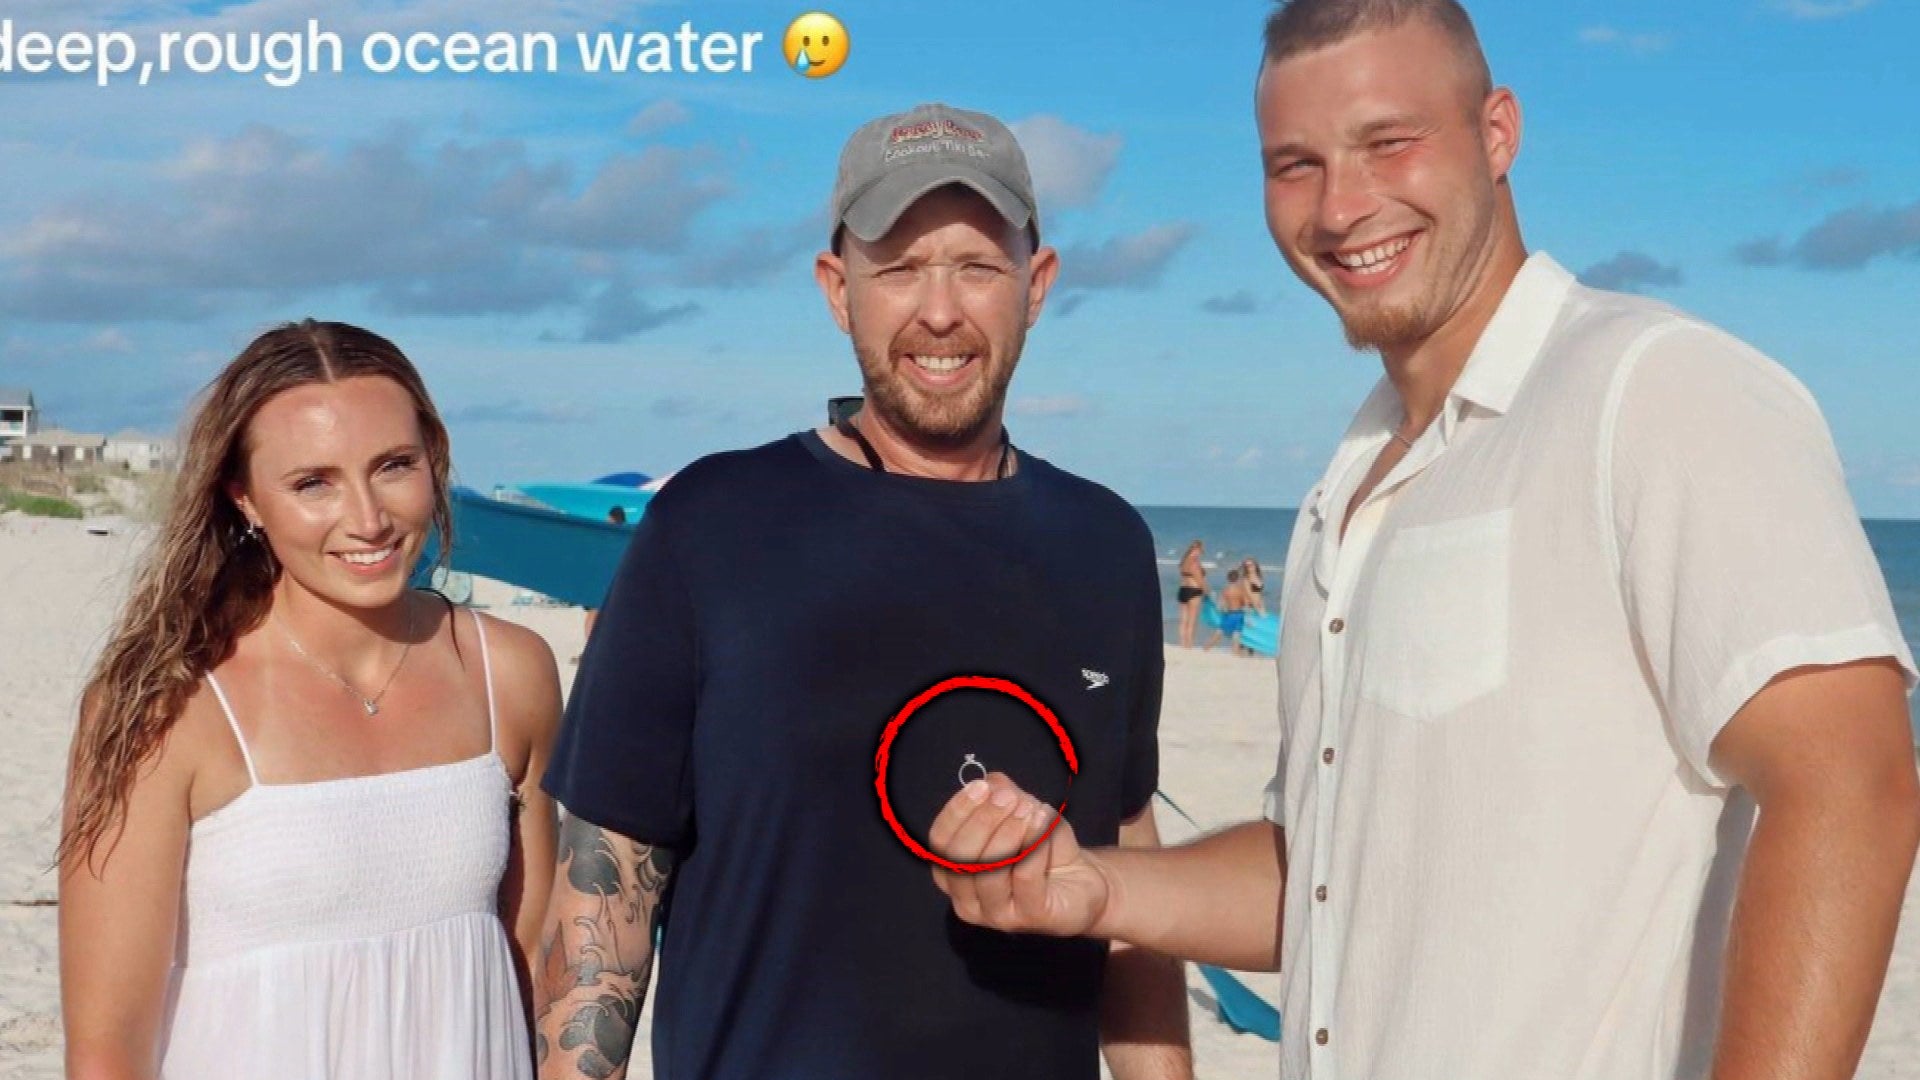 Girlfriend Loses Engagement Ring at Beach Proposal